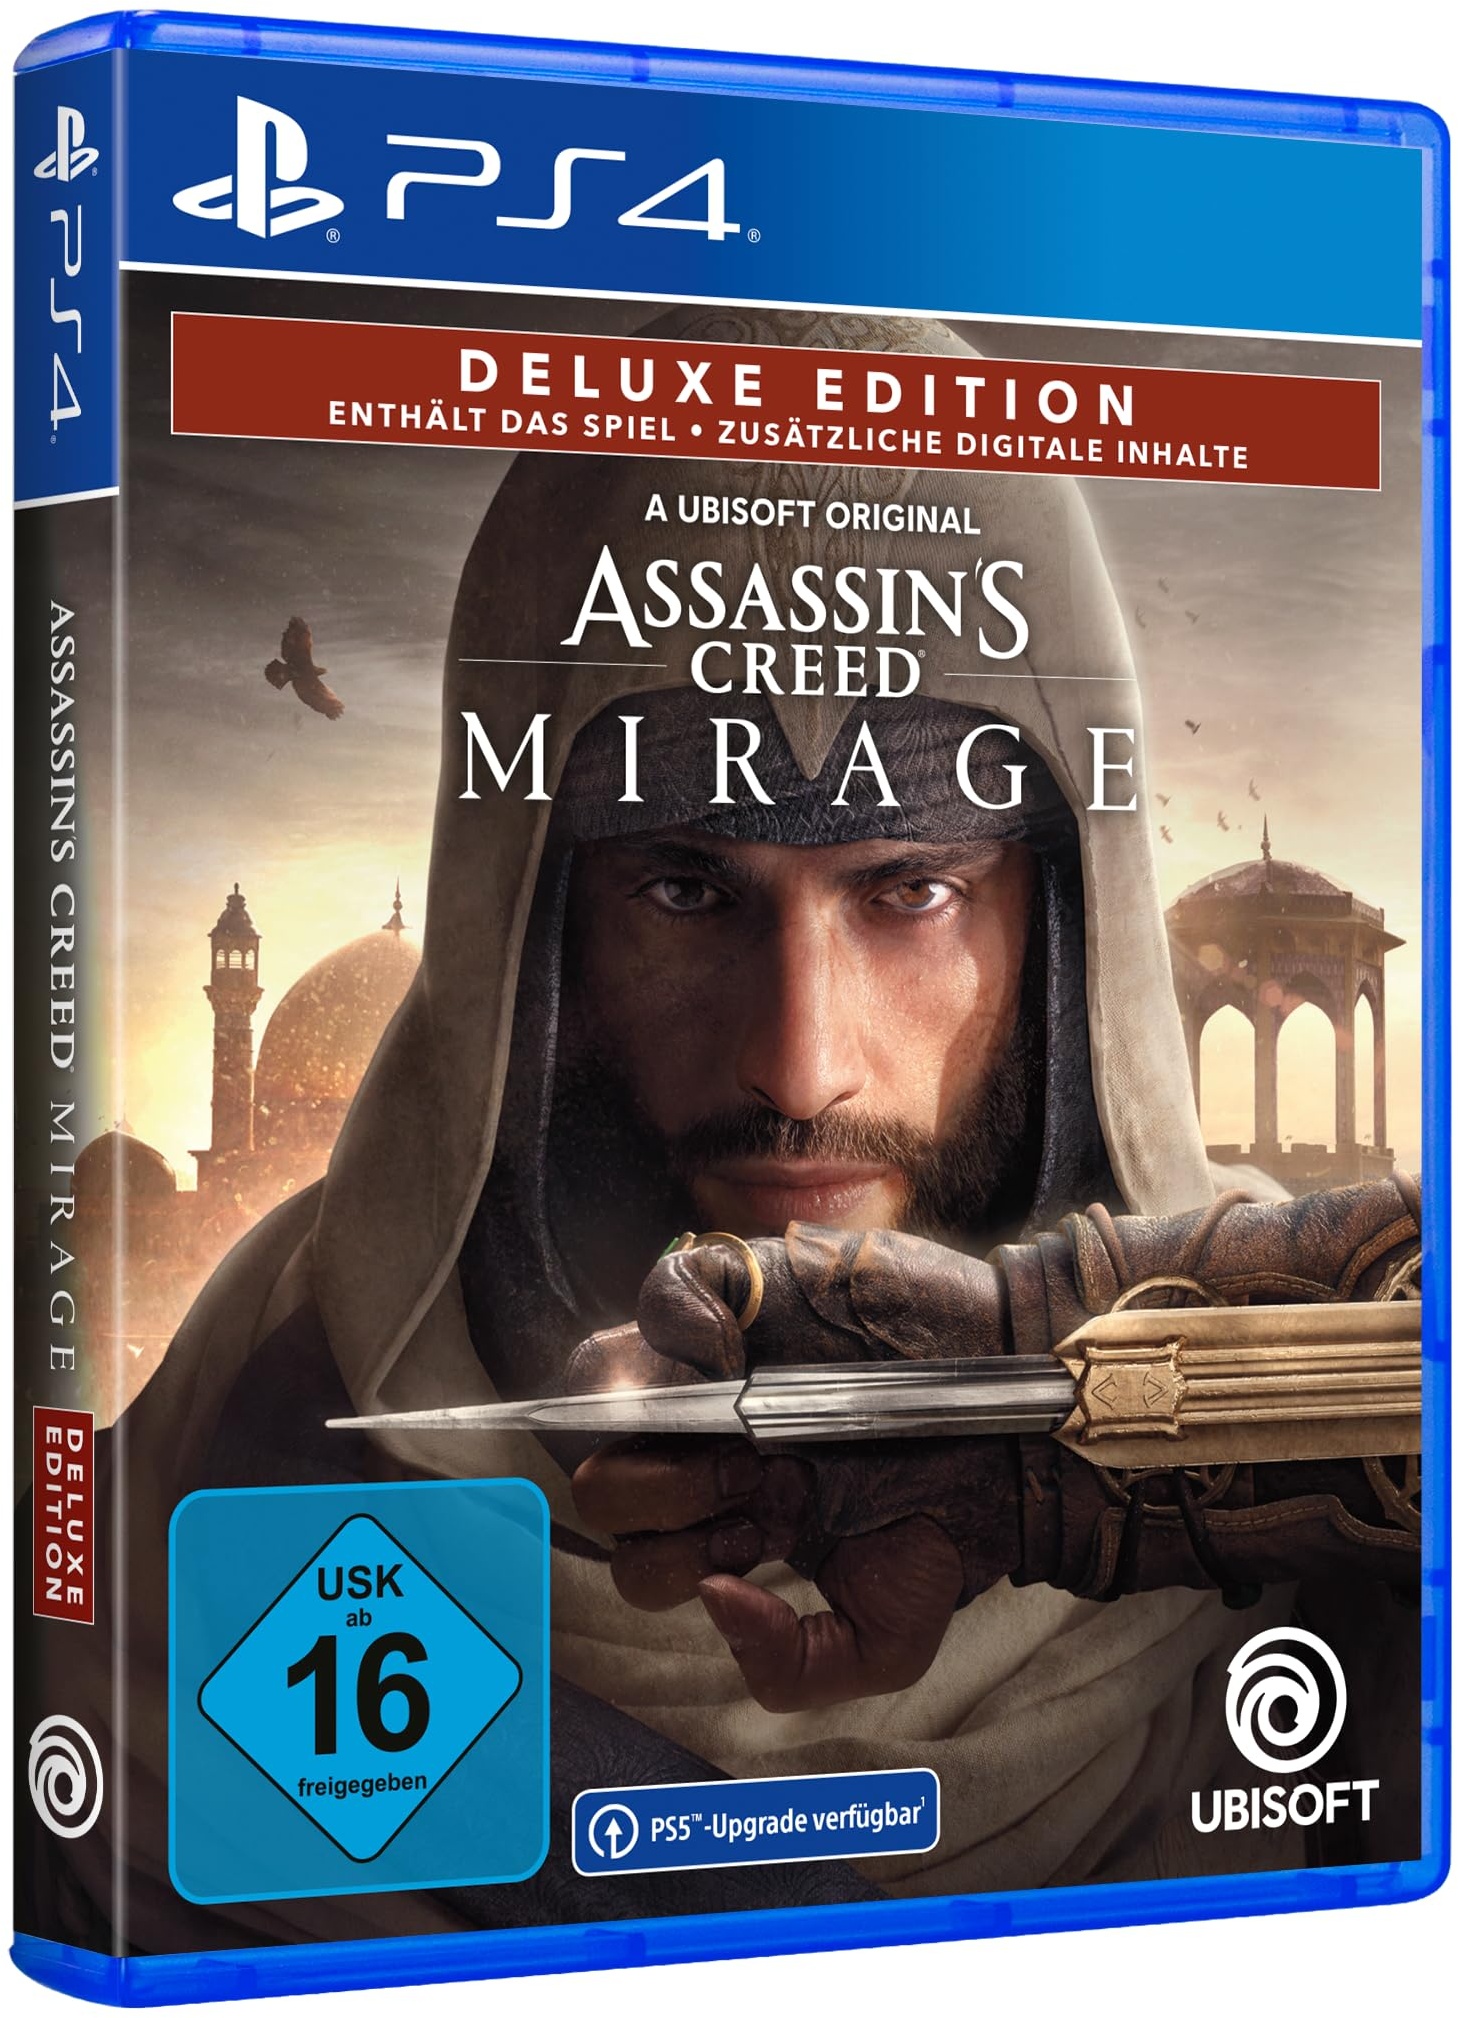 Assassin's Creed Mirage: Deluxe Edition [Playstation 4]- Uncut